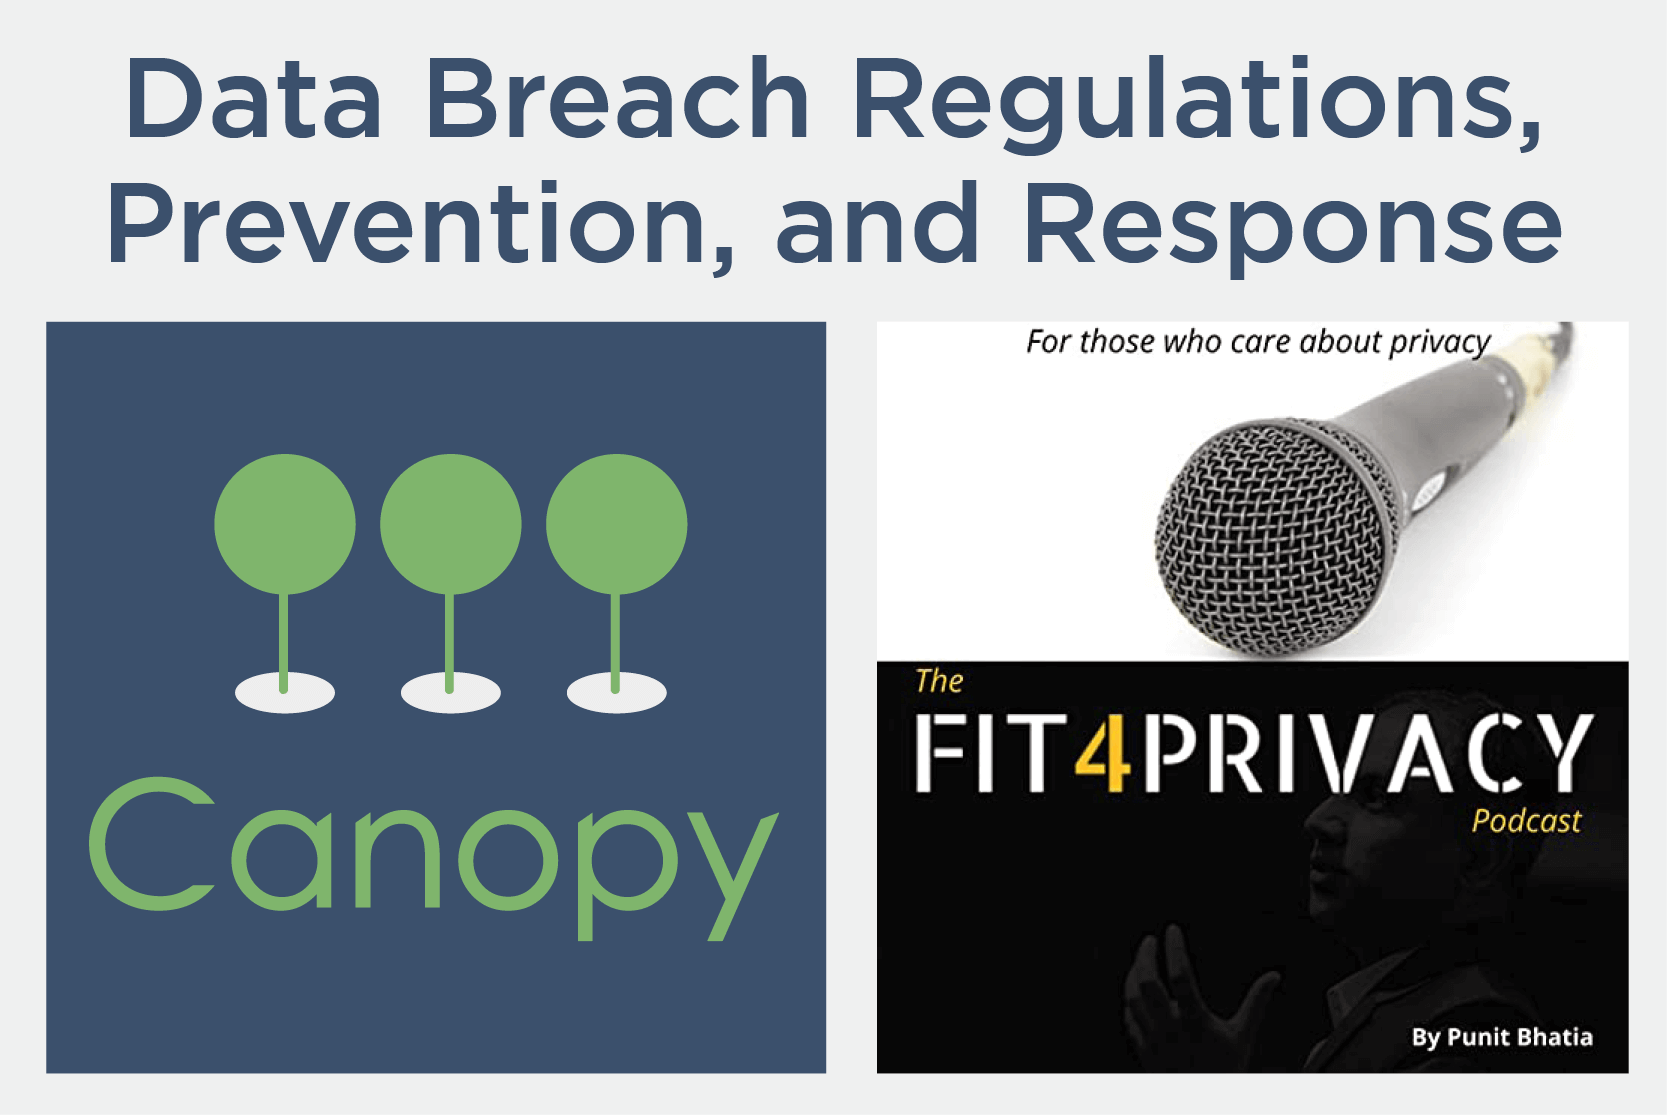 Data Breach Regulations, Prevention, and Response with Canopy logo and Fit4Privacy podcast art